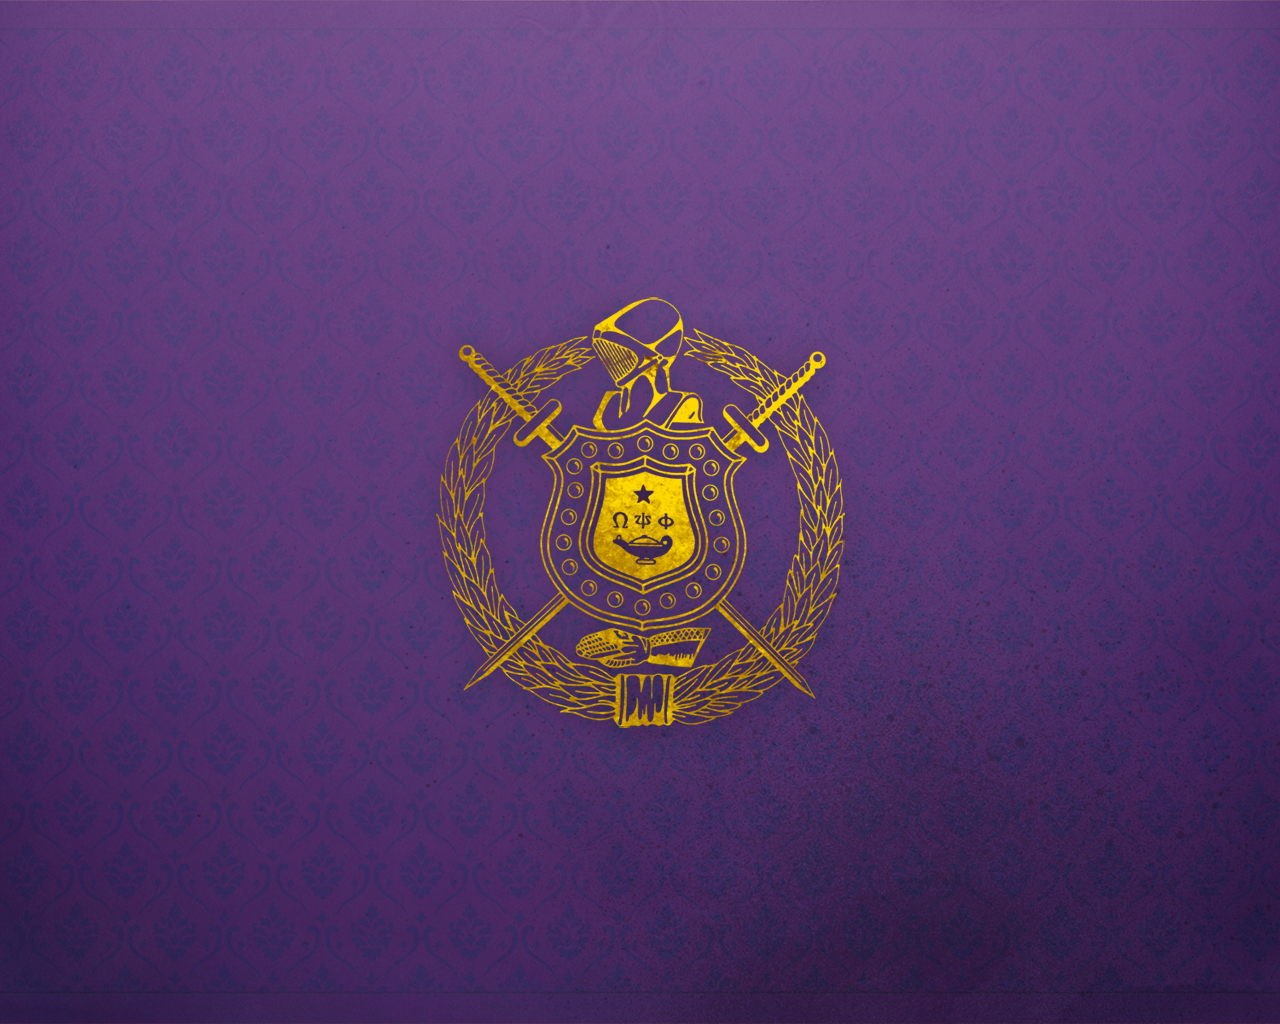 Update 79+ omega psi phi wallpapers best - in.cdgdbentre